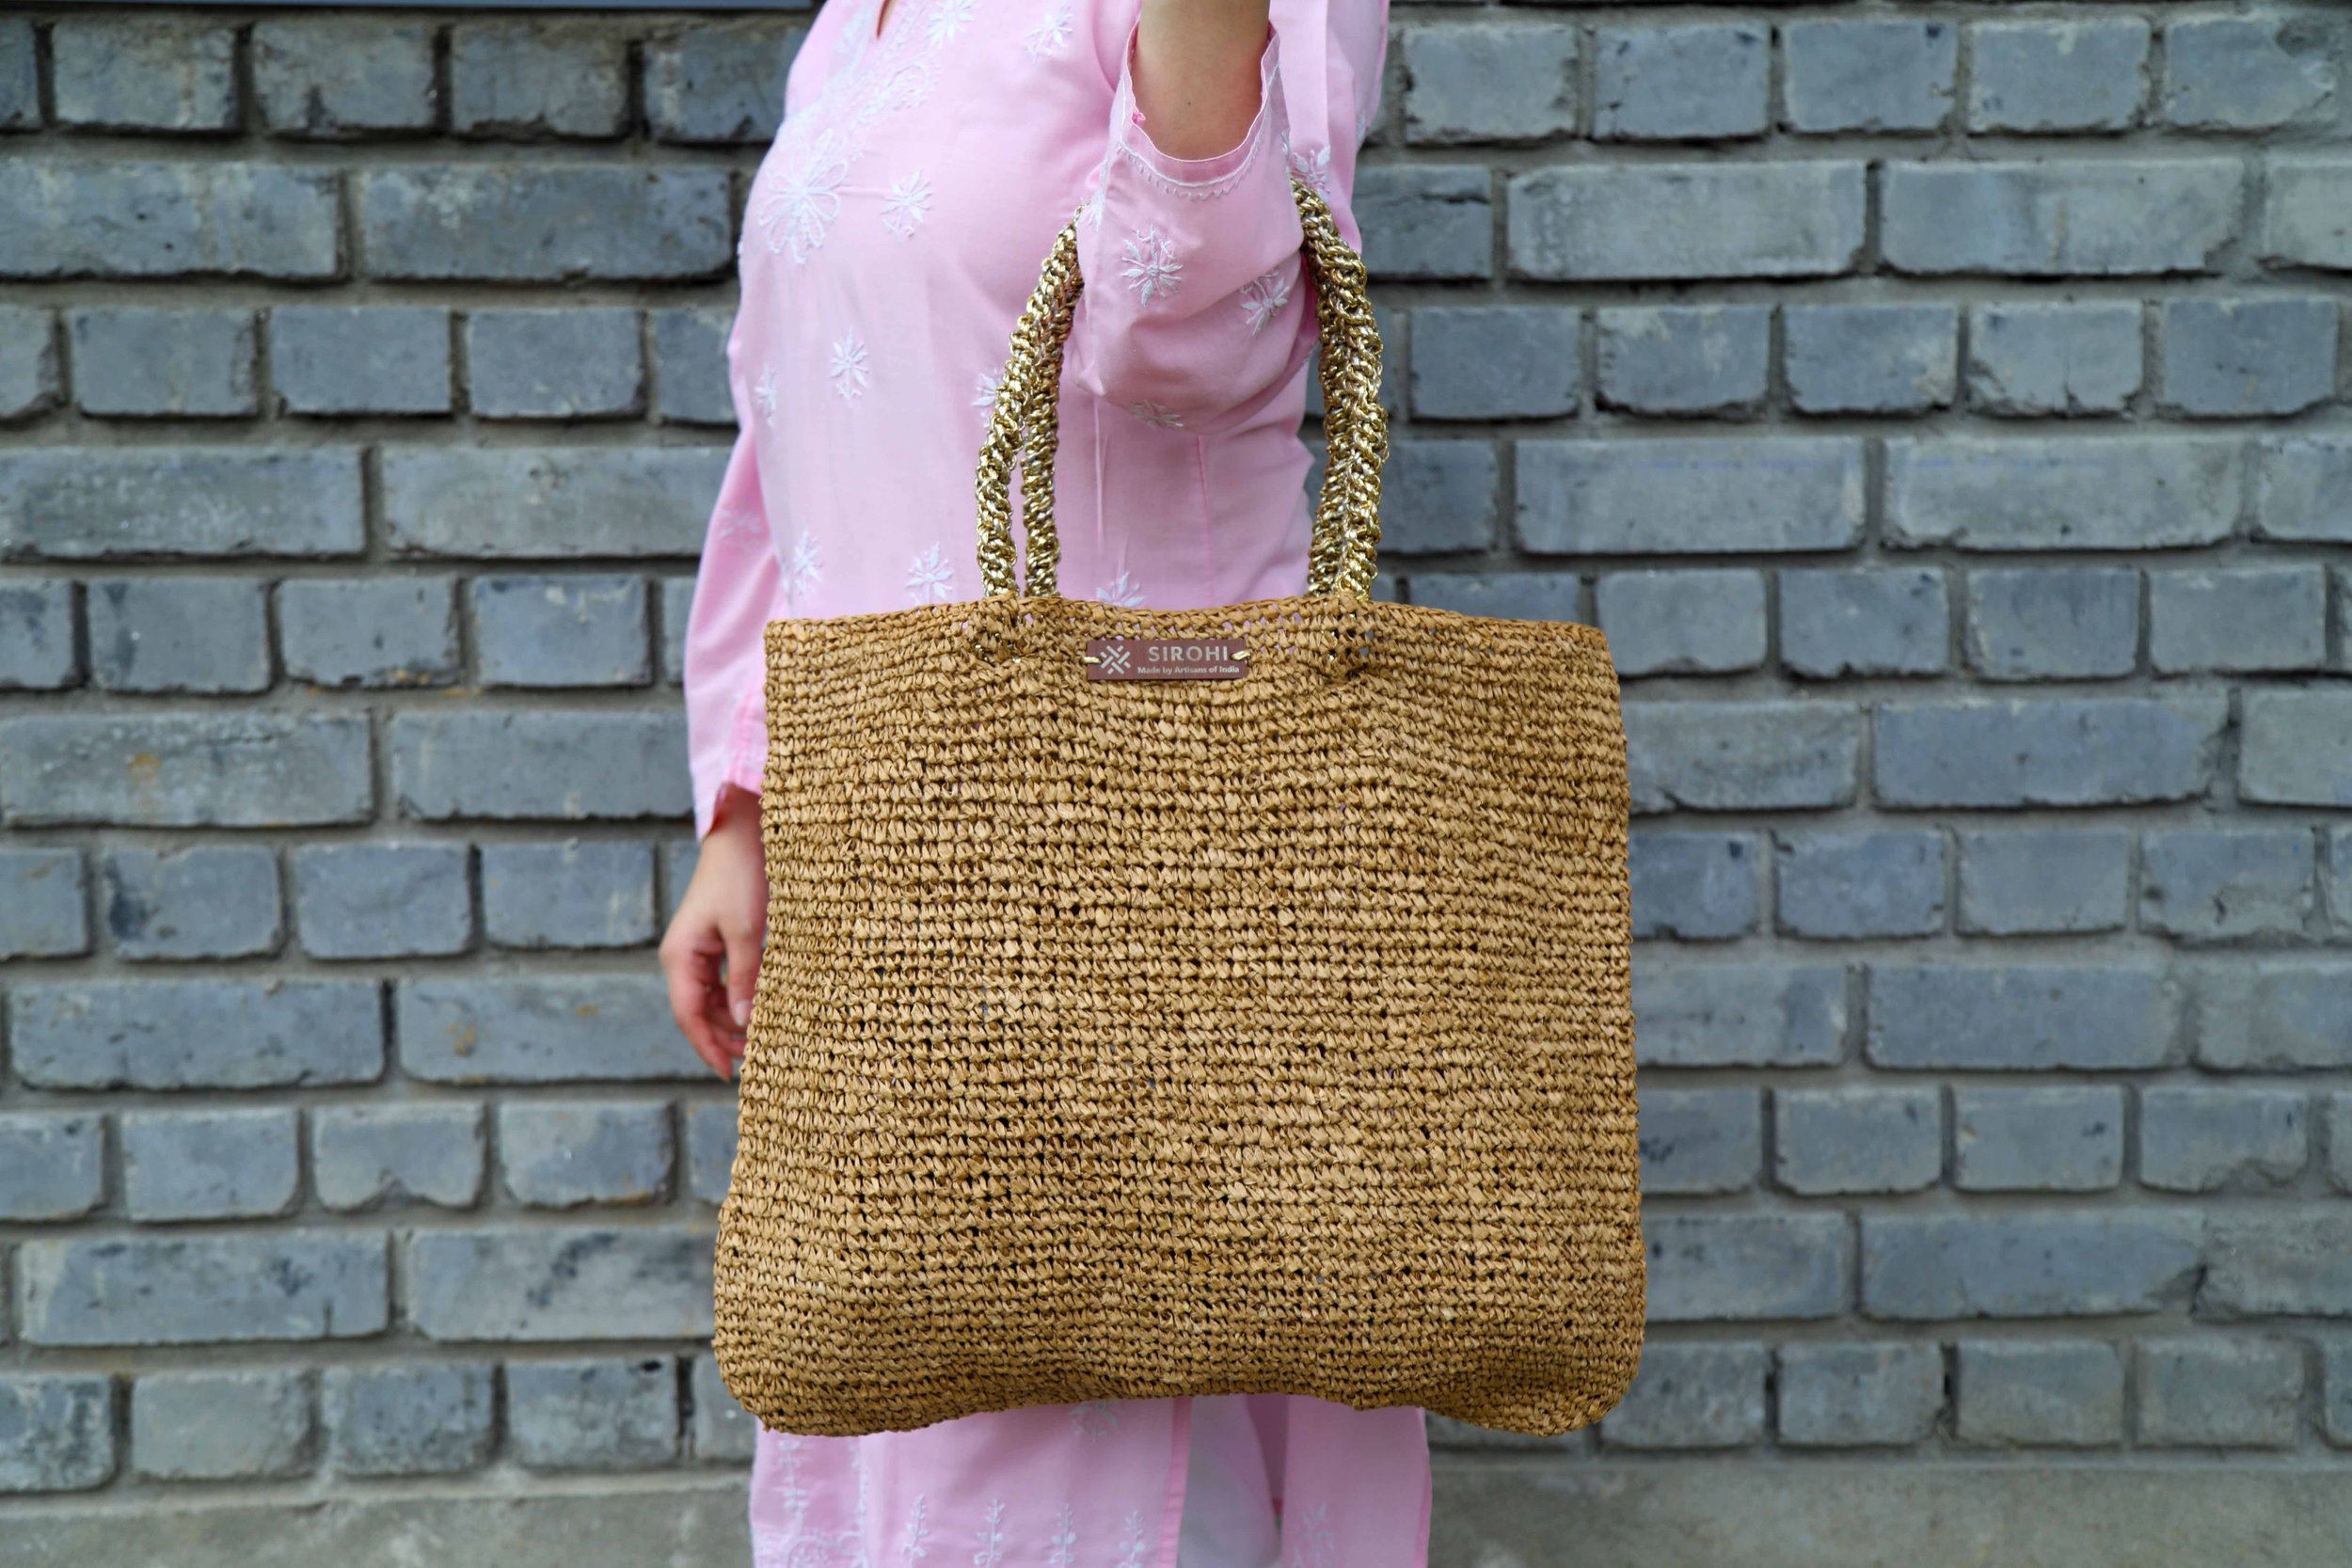 Pictured here is a Sirohi bag. 